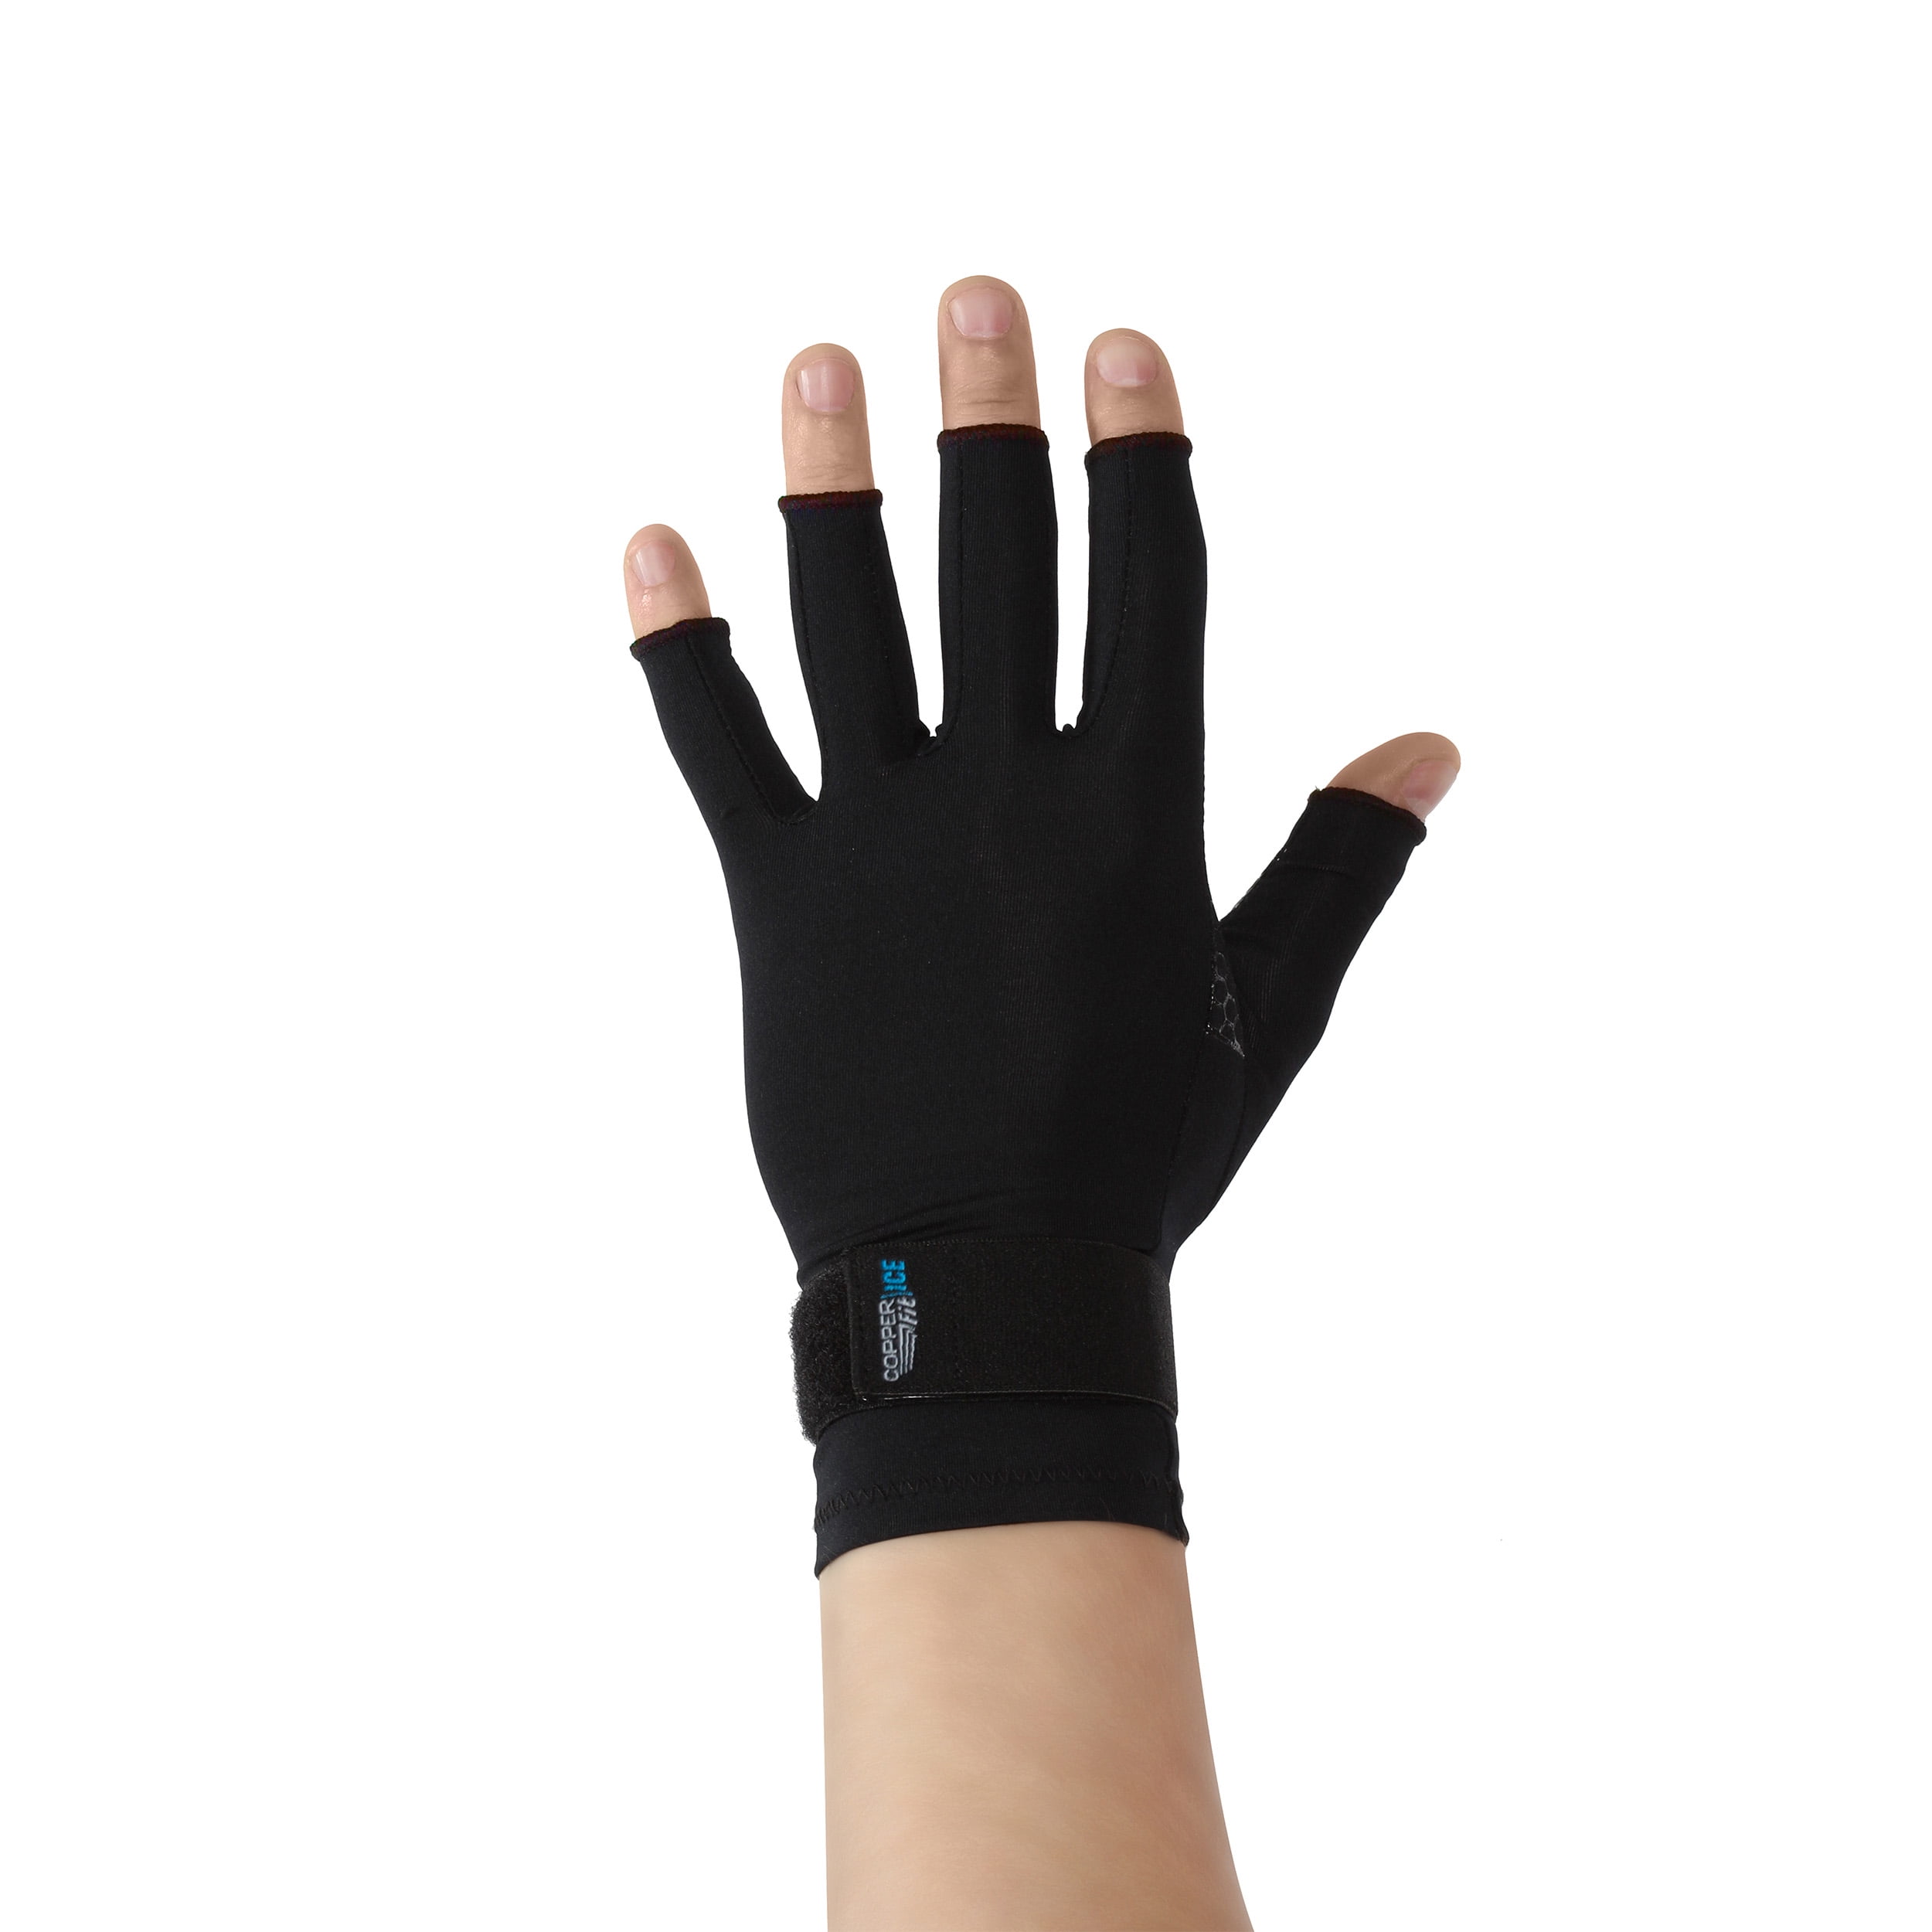 Copper Fit ICE Compression Gloves Infused with Menthol, Black, L/XL